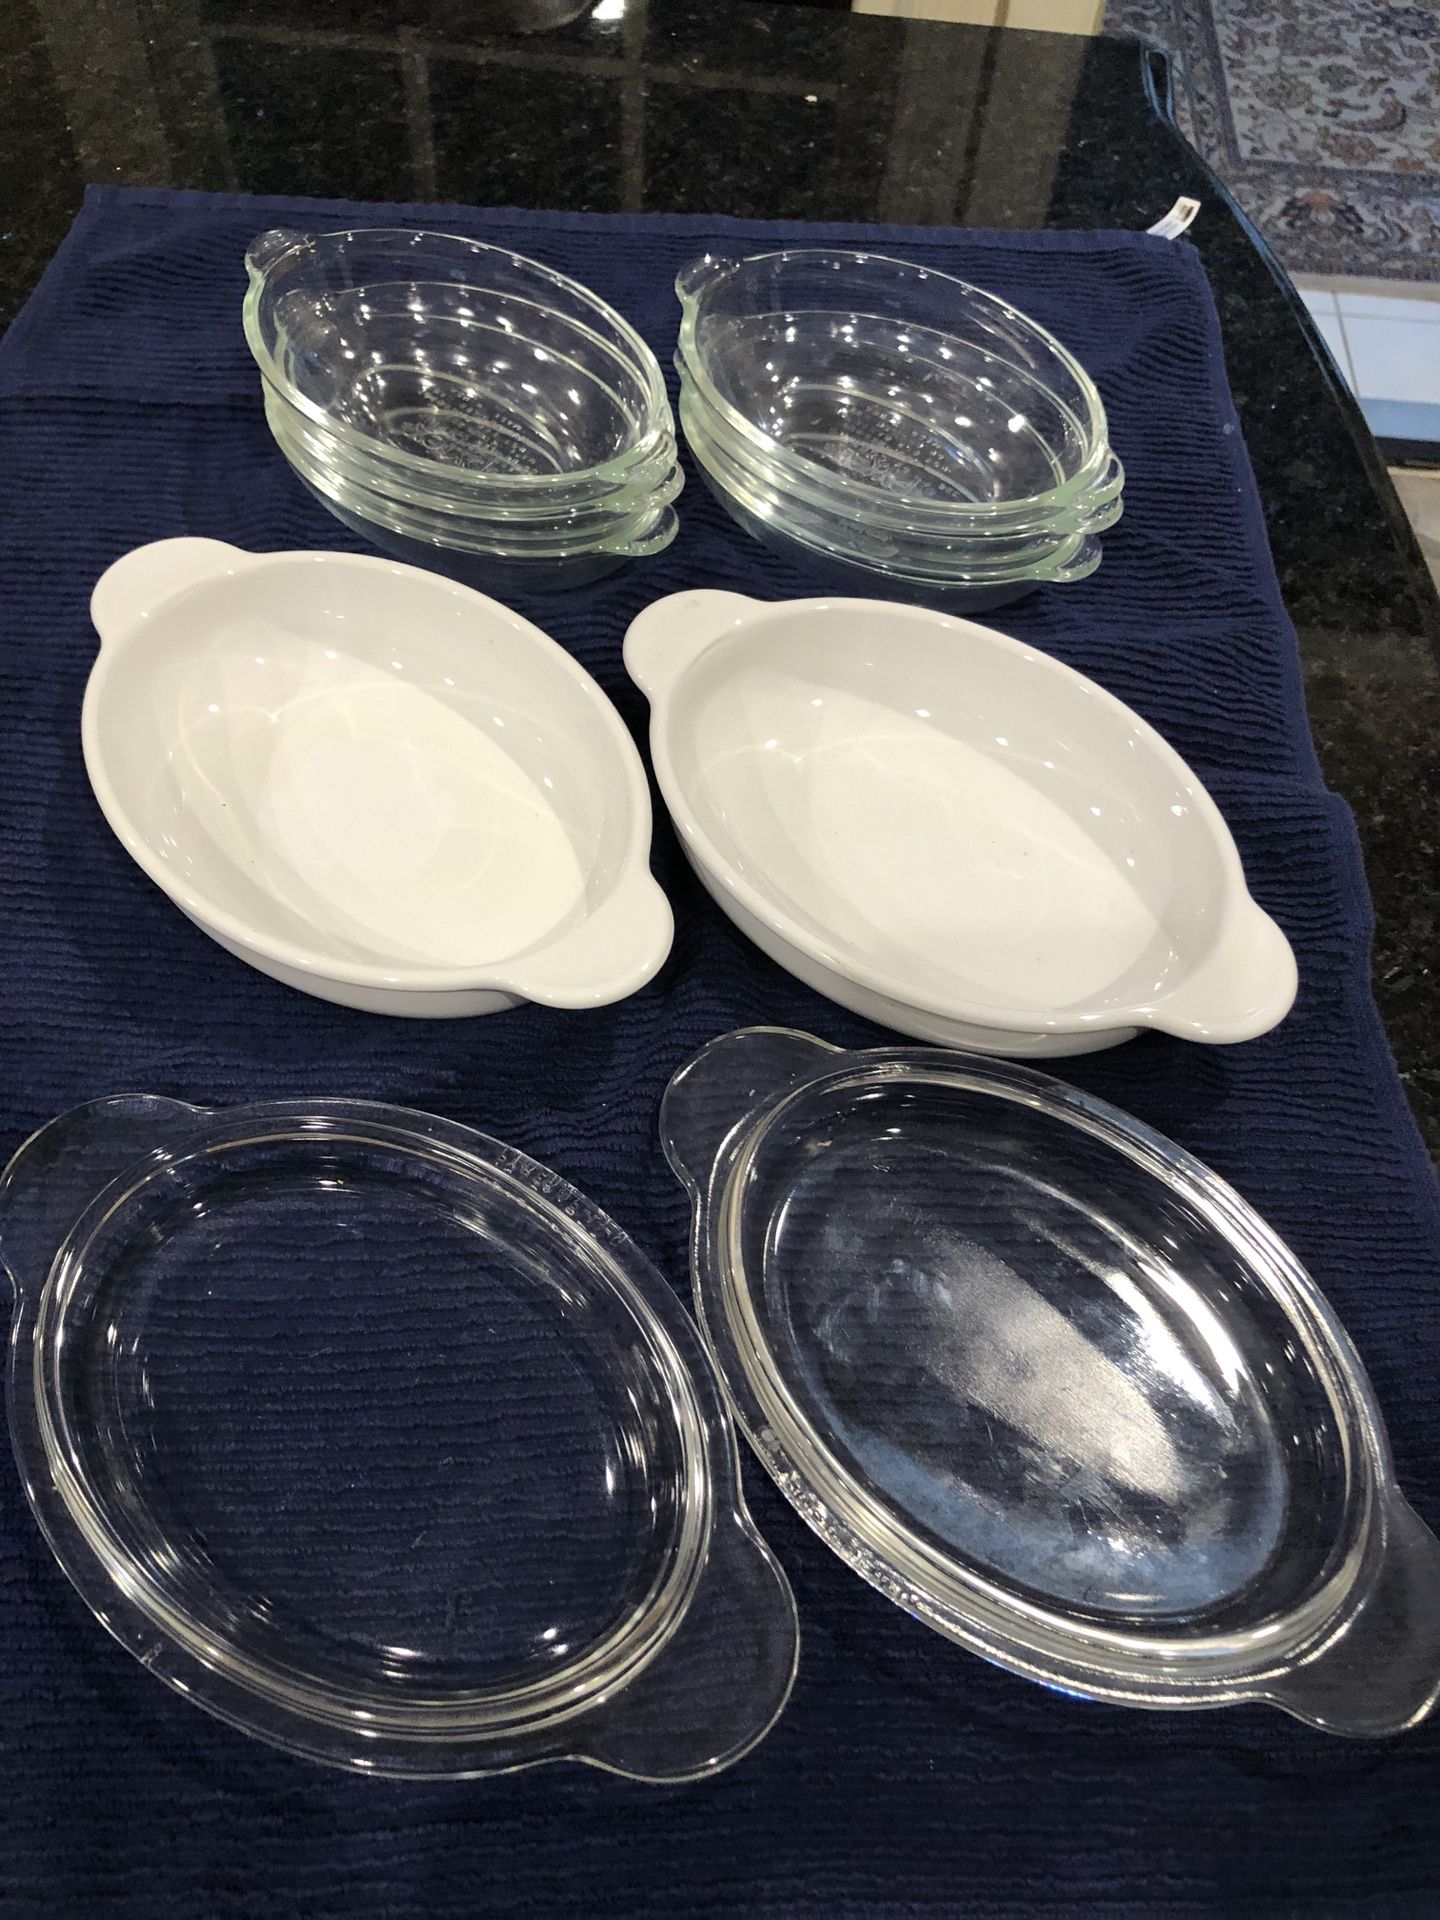 Pyrex oval dessert dishes & Corning Grab-its with lid